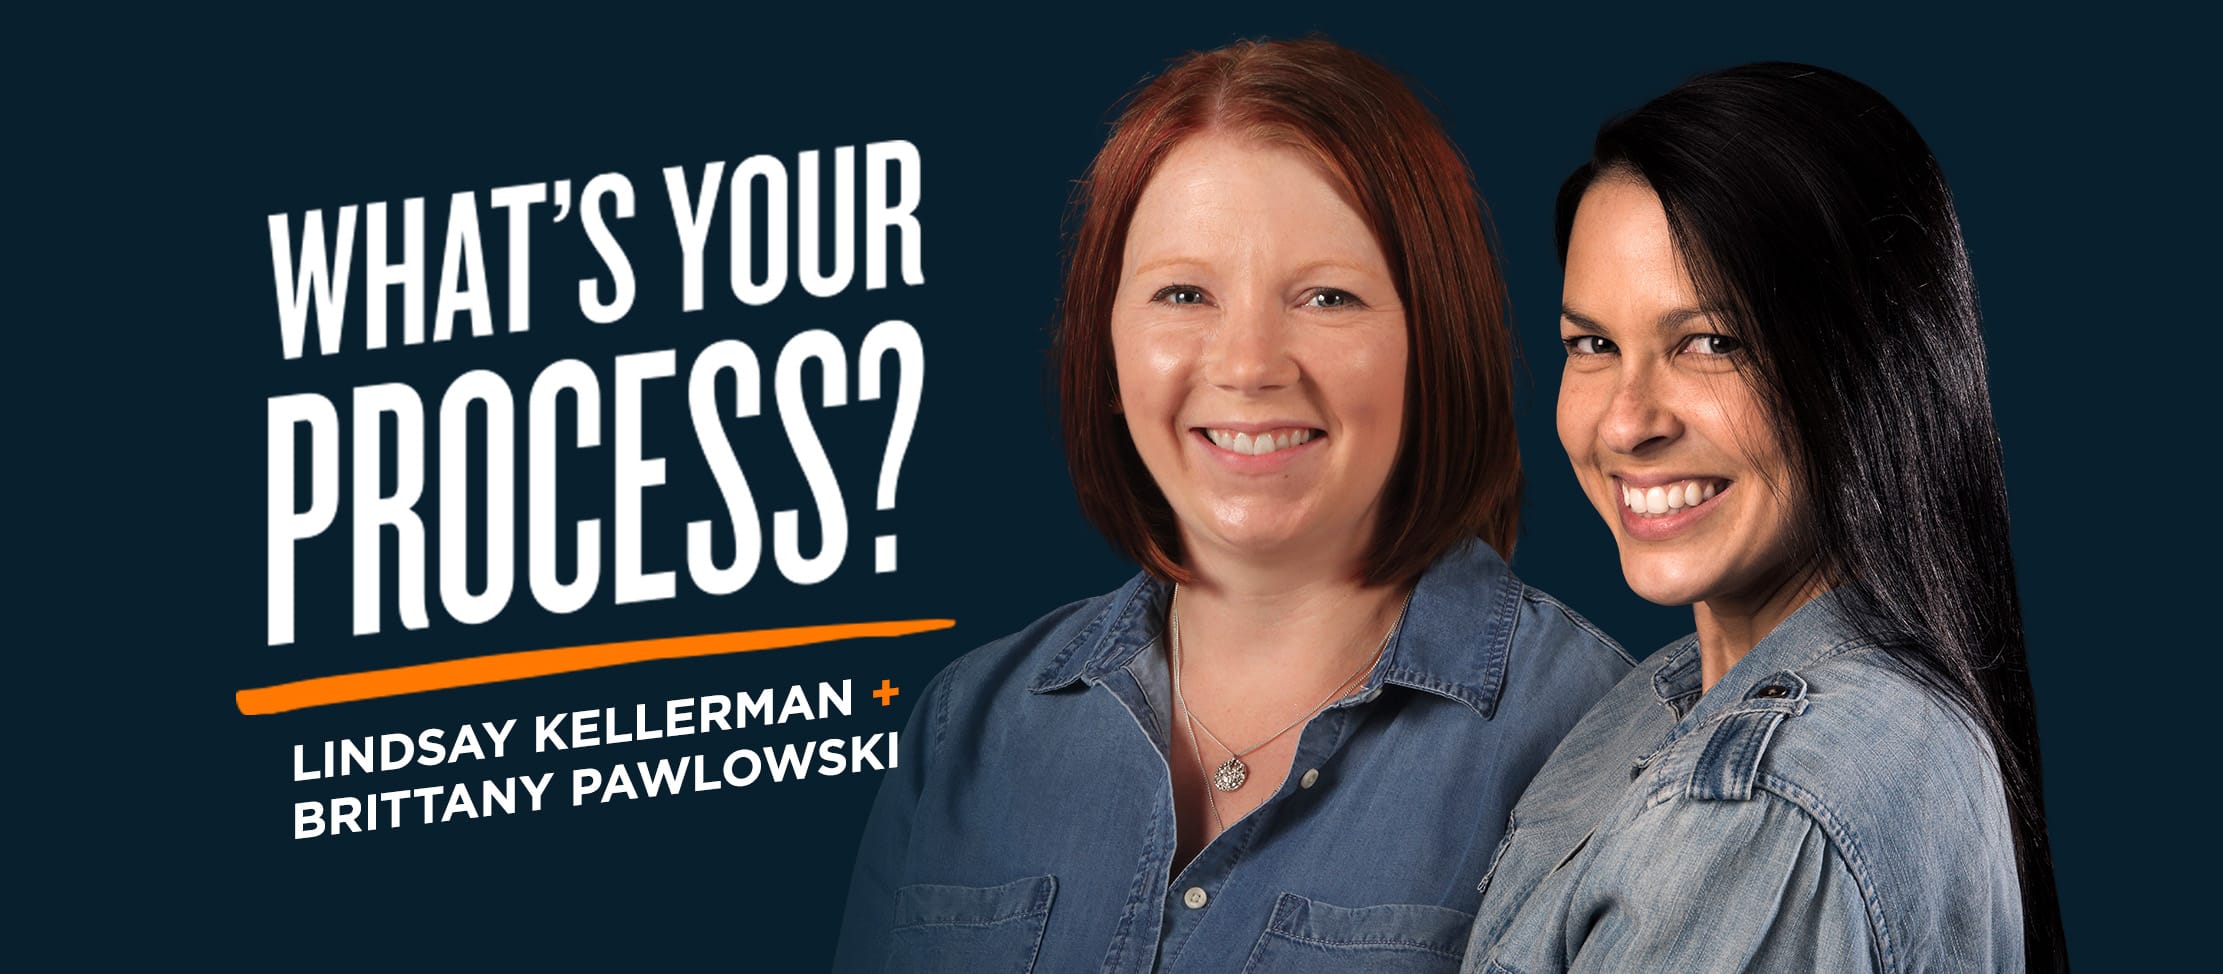 EPIC Blog | What's Your Process? Q+A on Traffic with Lindsay Kellerman + Brittany Pawlowski